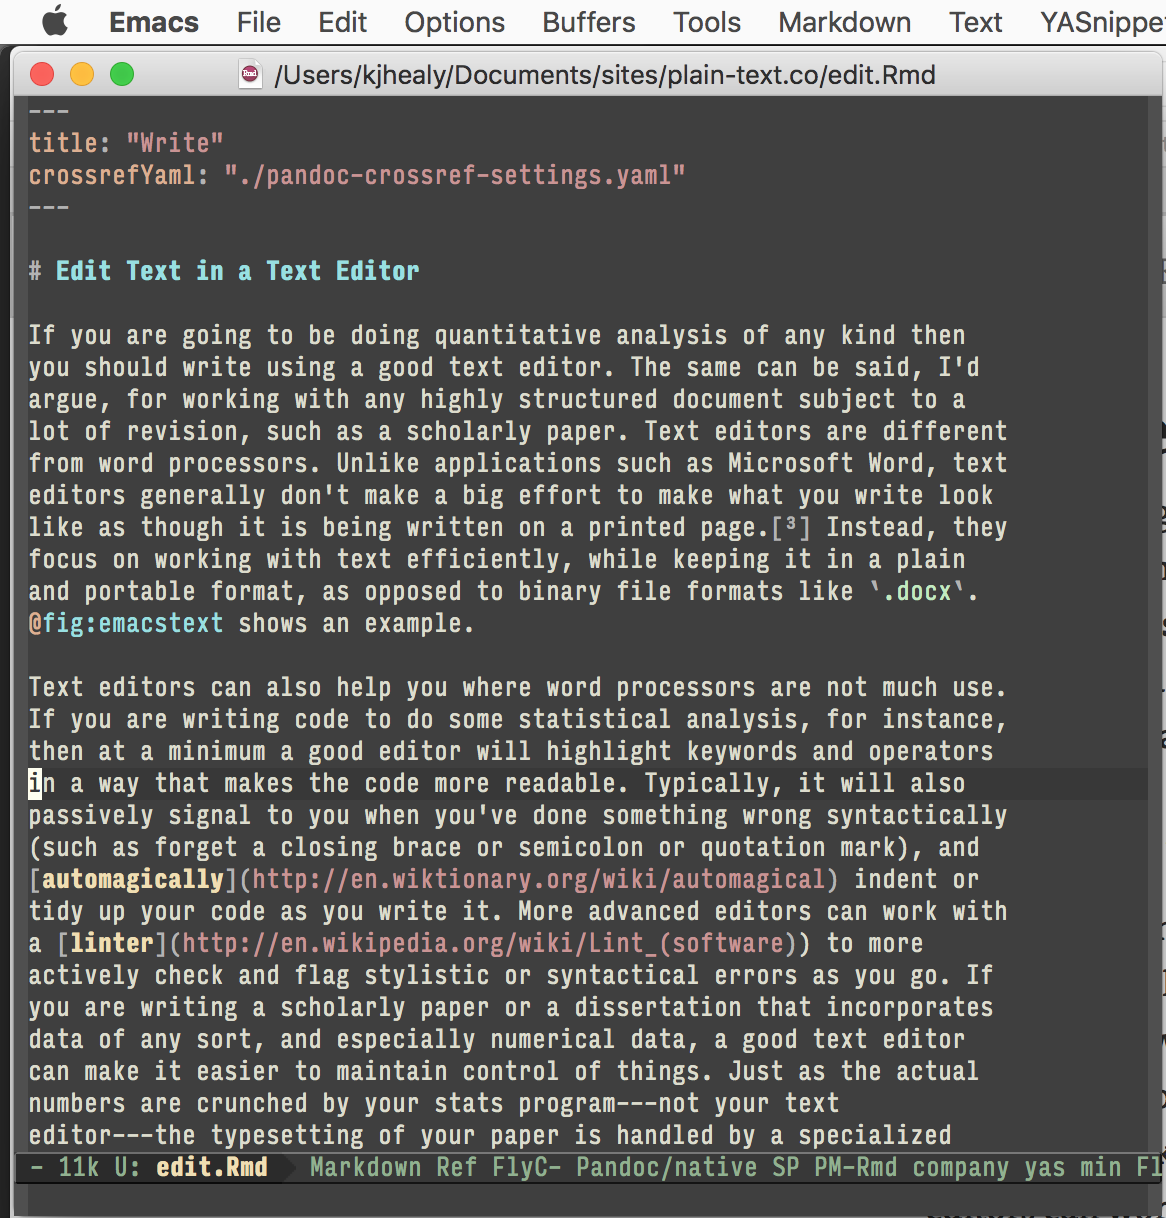 Working on part of this document in Emacs.